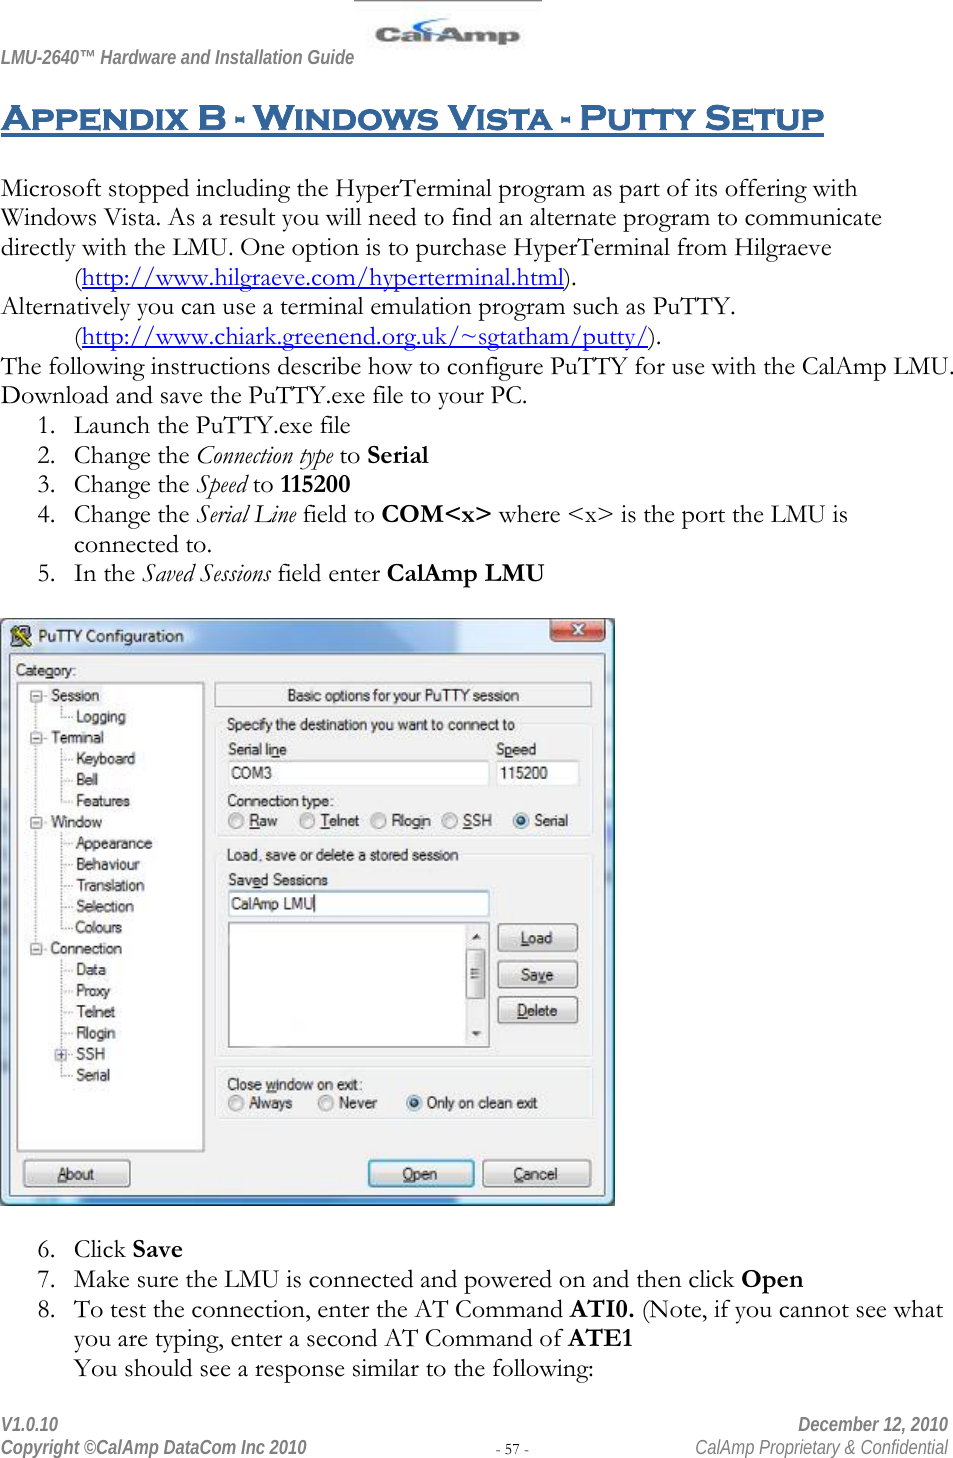 LMU-2640™ Hardware and Installation Guide  V1.0.10    December 12, 2010 Copyright ©CalAmp DataCom Inc 2010 - 57 -  CalAmp Proprietary &amp; Confidential Appendix B - Windows Vista - Putty Setup  Microsoft stopped including the HyperTerminal program as part of its offering with Windows Vista. As a result you will need to find an alternate program to communicate directly with the LMU. One option is to purchase HyperTerminal from Hilgraeve  (http://www.hilgraeve.com/hyperterminal.html).  Alternatively you can use a terminal emulation program such as PuTTY.  (http://www.chiark.greenend.org.uk/~sgtatham/putty/).  The following instructions describe how to configure PuTTY for use with the CalAmp LMU. Download and save the PuTTY.exe file to your PC. 1. Launch the PuTTY.exe file 2. Change the Connection type to Serial 3. Change the Speed to 115200 4. Change the Serial Line field to COM&lt;x&gt; where &lt;x&gt; is the port the LMU is connected to. 5. In the Saved Sessions field enter CalAmp LMU    6. Click Save 7. Make sure the LMU is connected and powered on and then click Open 8. To test the connection, enter the AT Command ATI0. (Note, if you cannot see what you are typing, enter a second AT Command of ATE1 You should see a response similar to the following: 